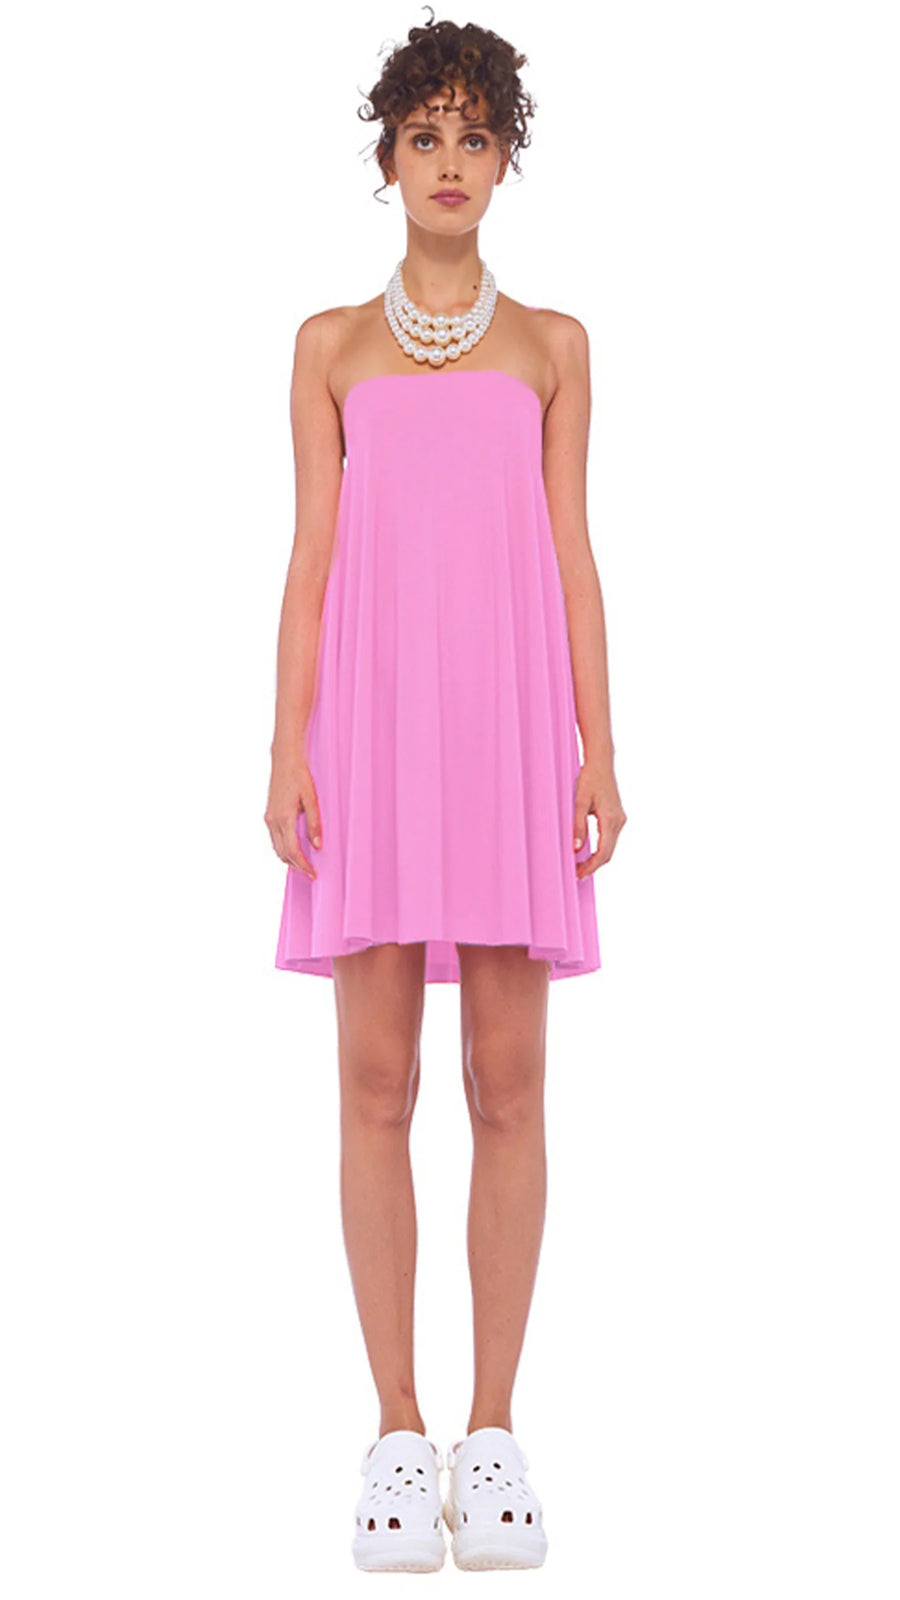 Strapless Swing Dress - Candy Pink